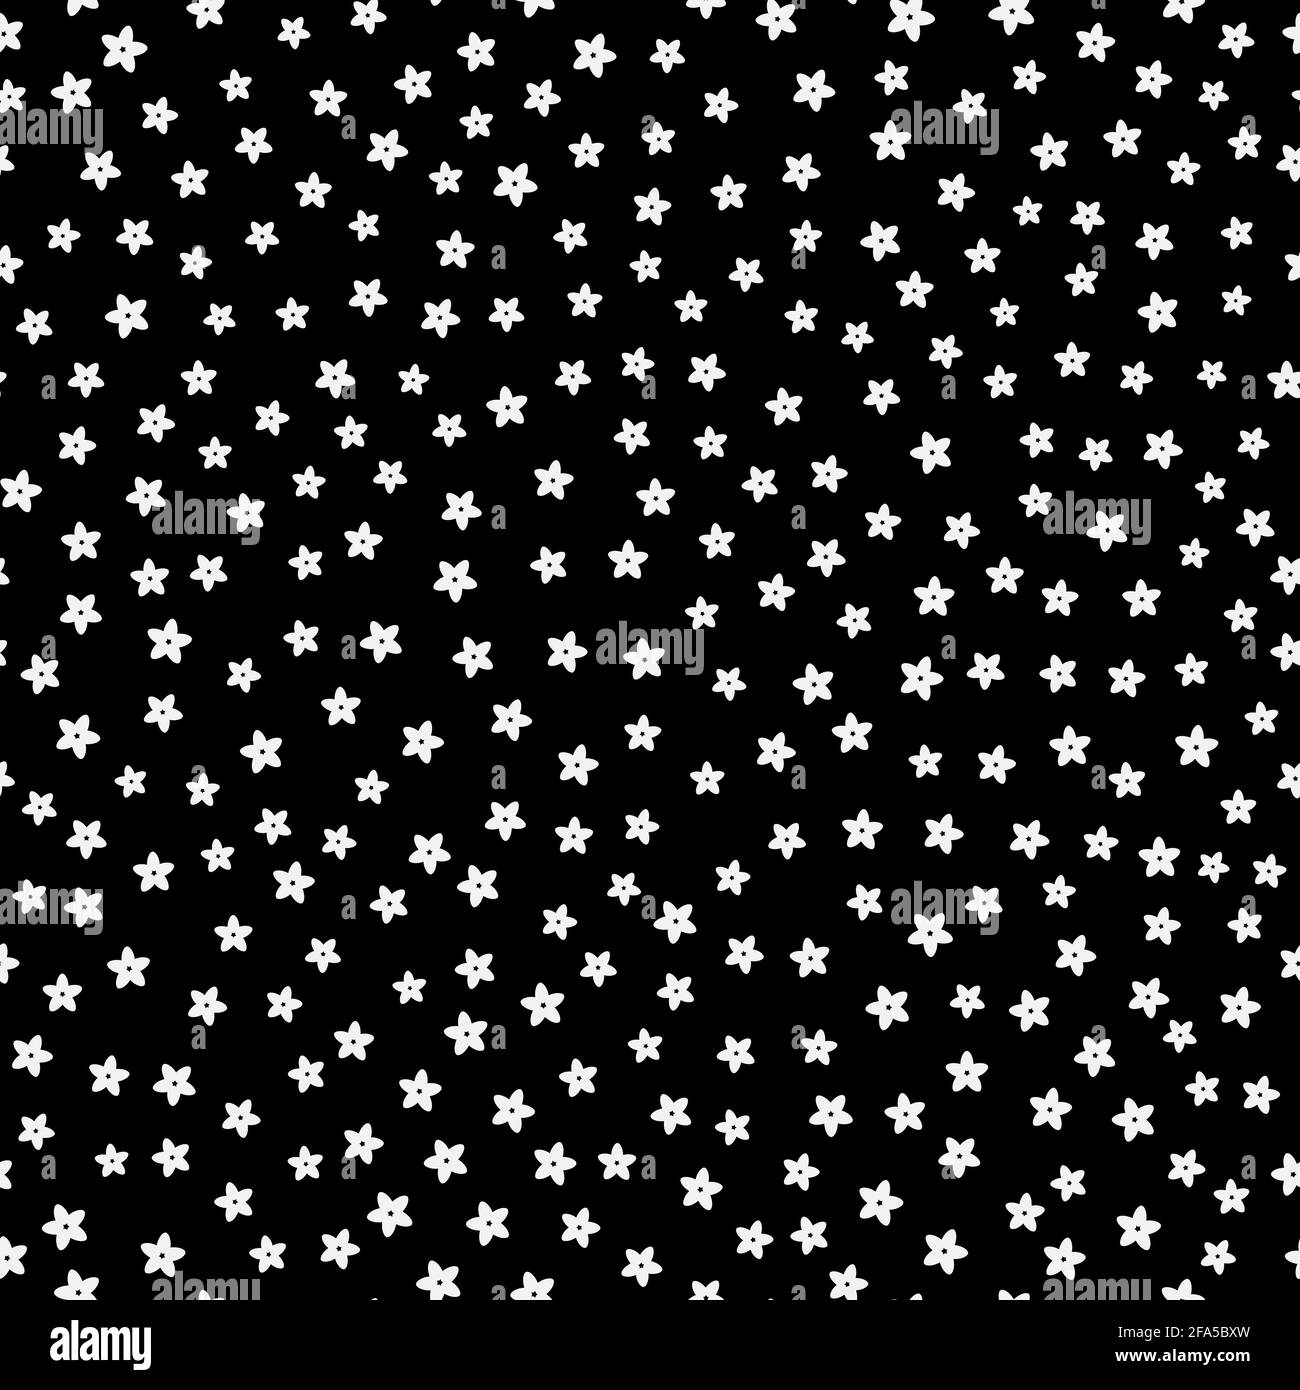 Retro floral wallpaper small flowers Black and White Stock Photos & Images  - Alamy